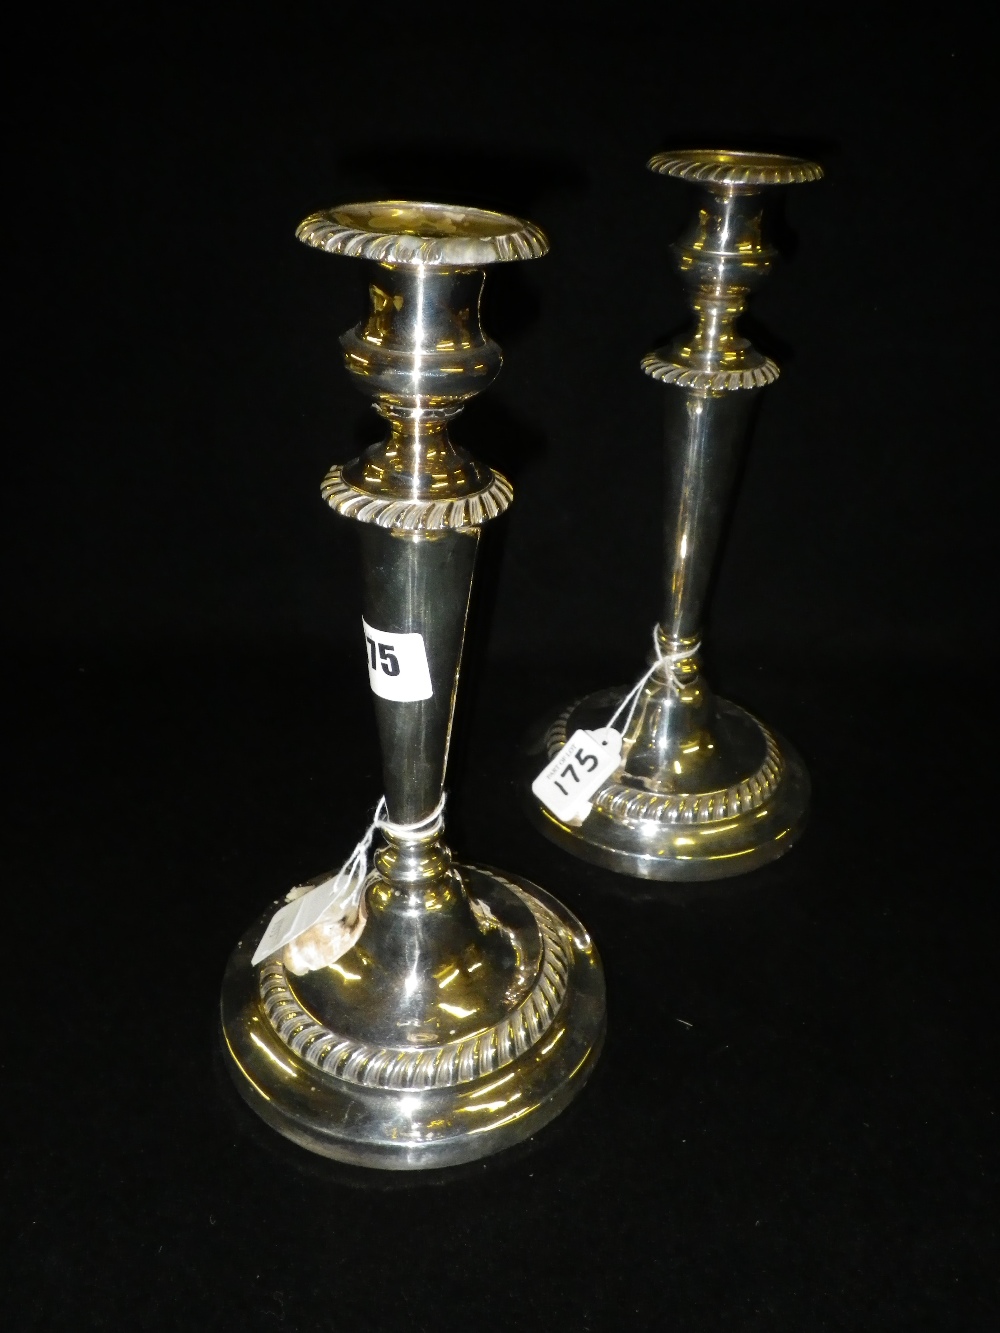 A pair of plated candlesticks, with circular bases